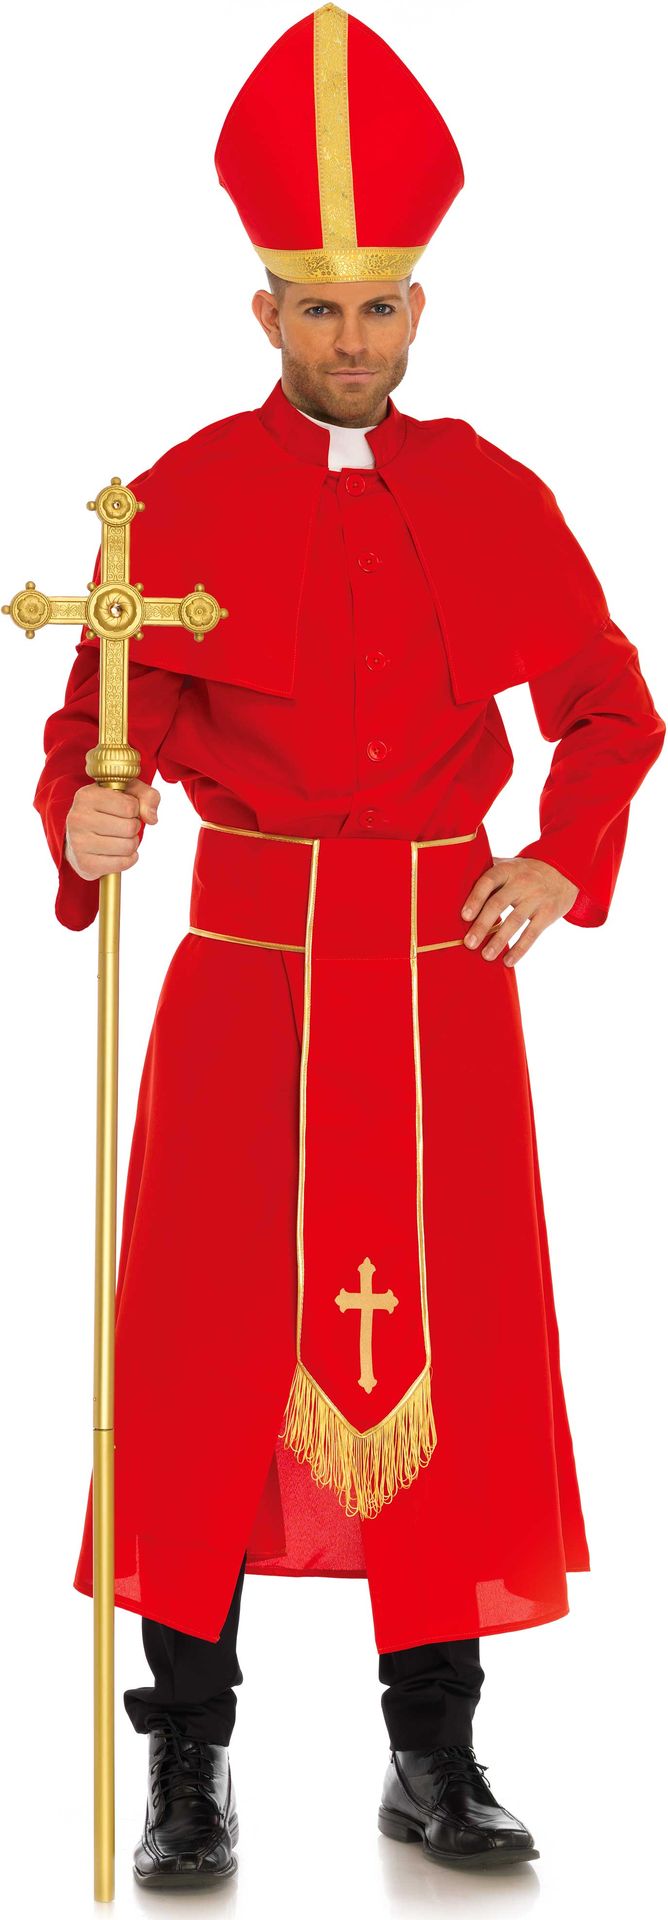 Priester outfit